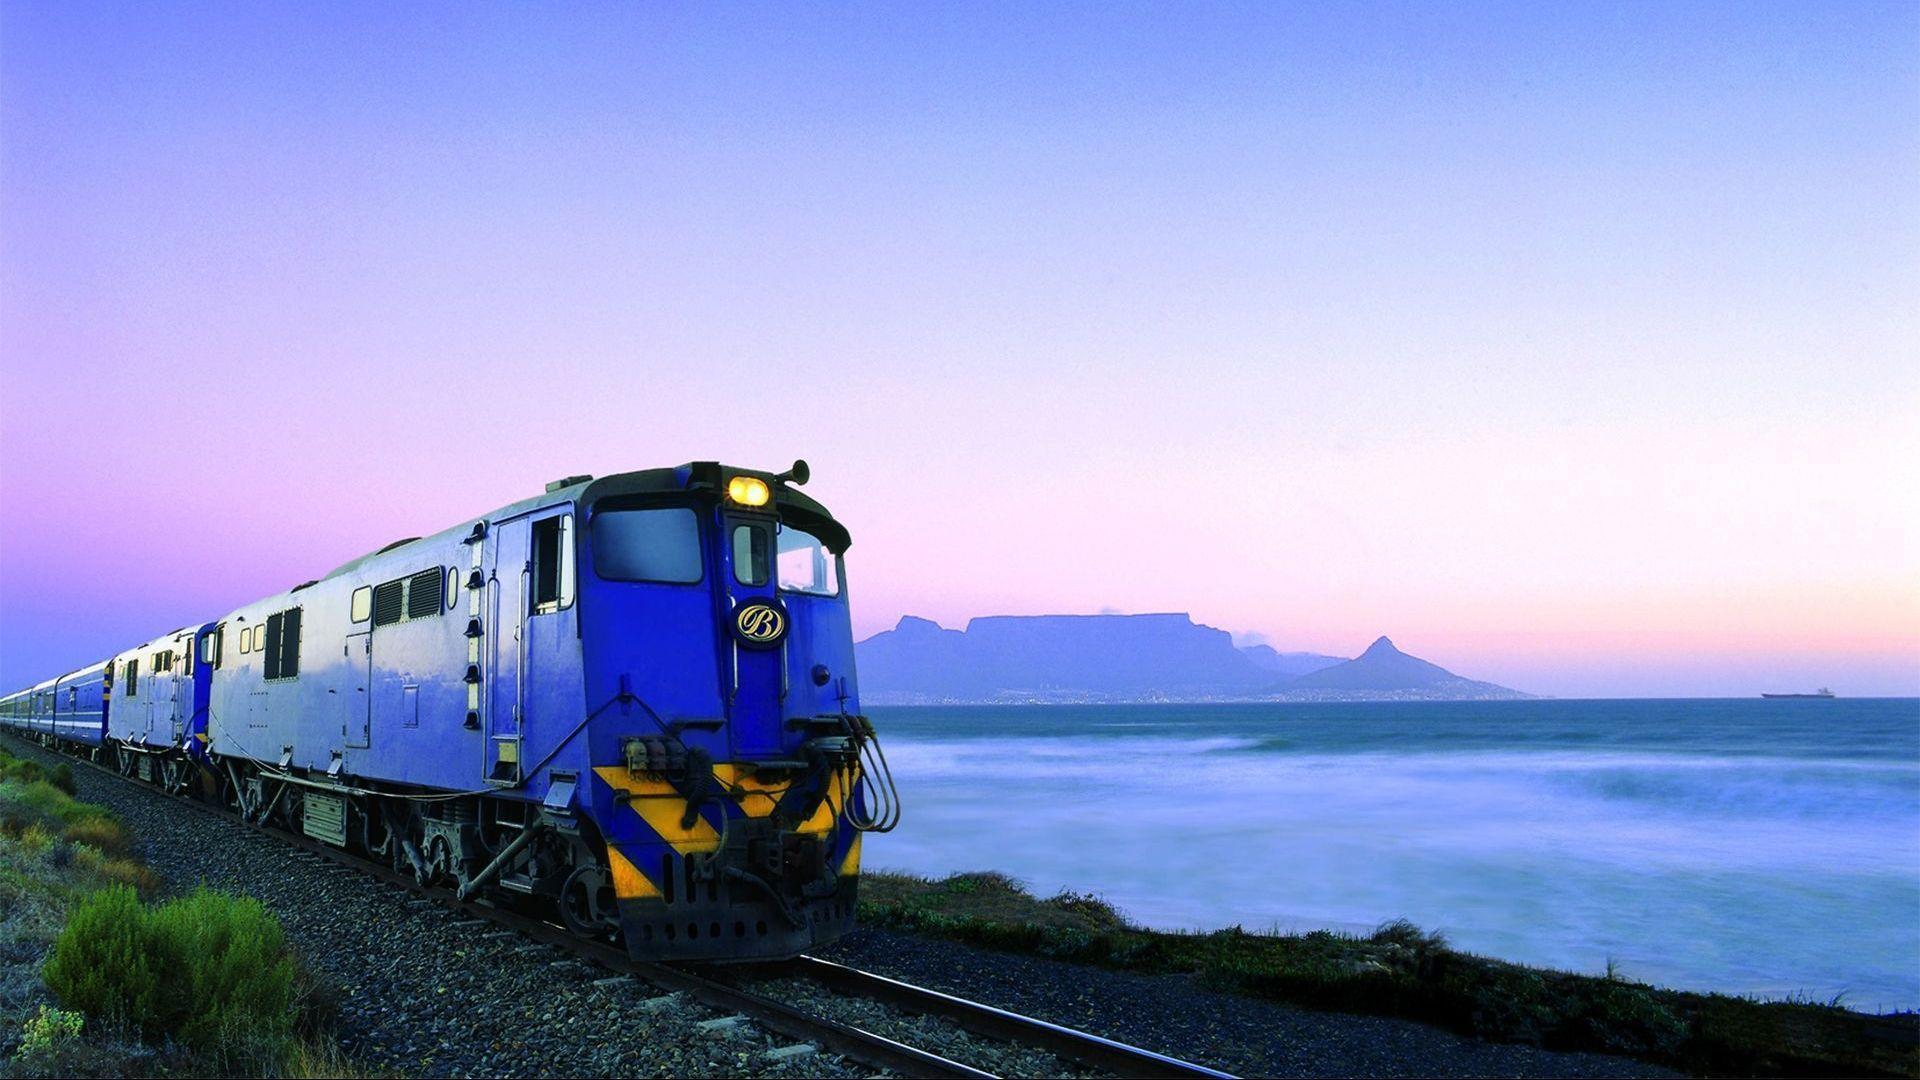 HD Train Leaving Table Mountain South Africa Wallpaper. Download